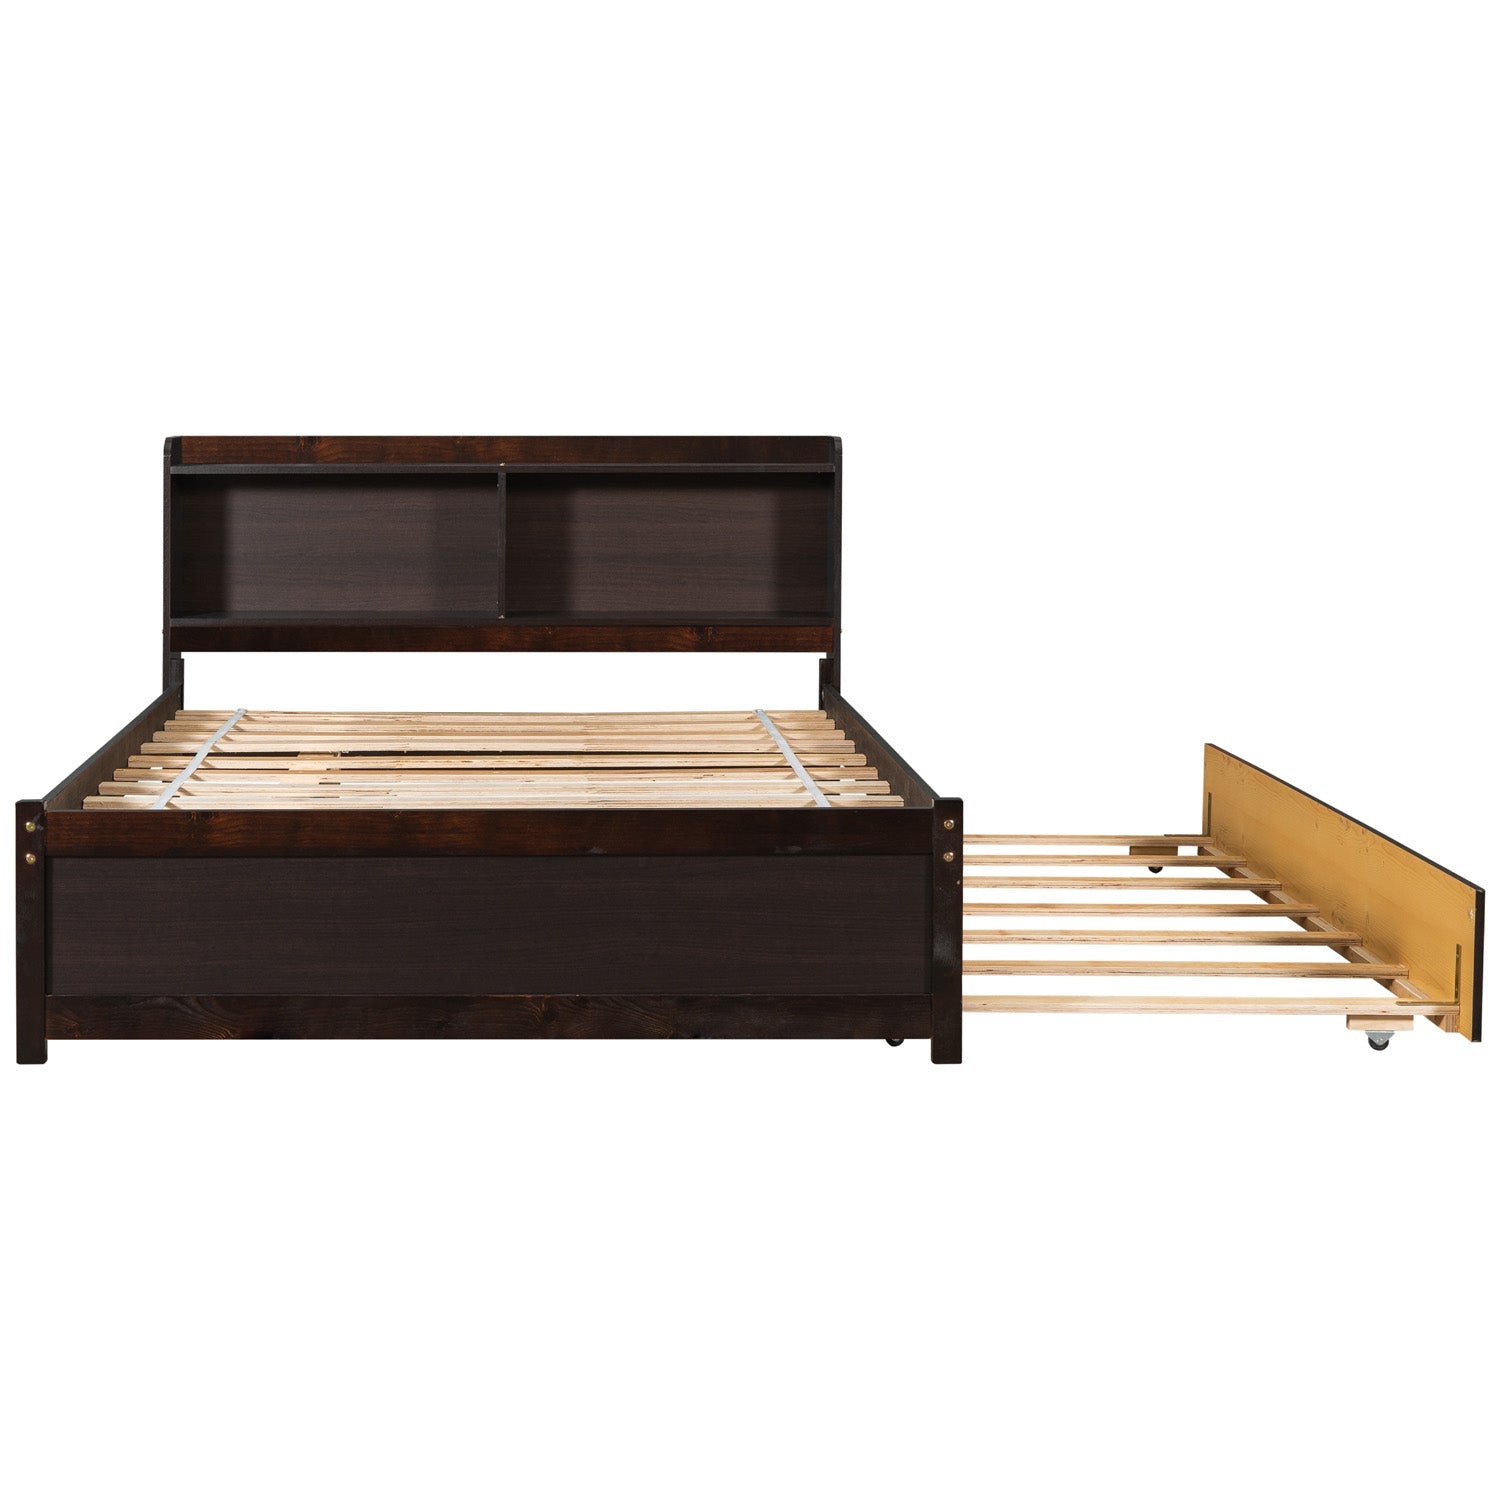 SYNGAR Full Bed Frame with Storage and Trundle for Teens Adults, Espresso Trundle Full Bed Frame with Bookcase Headboard, Solid wood, Easy to Assemble, No Box Spring Needed